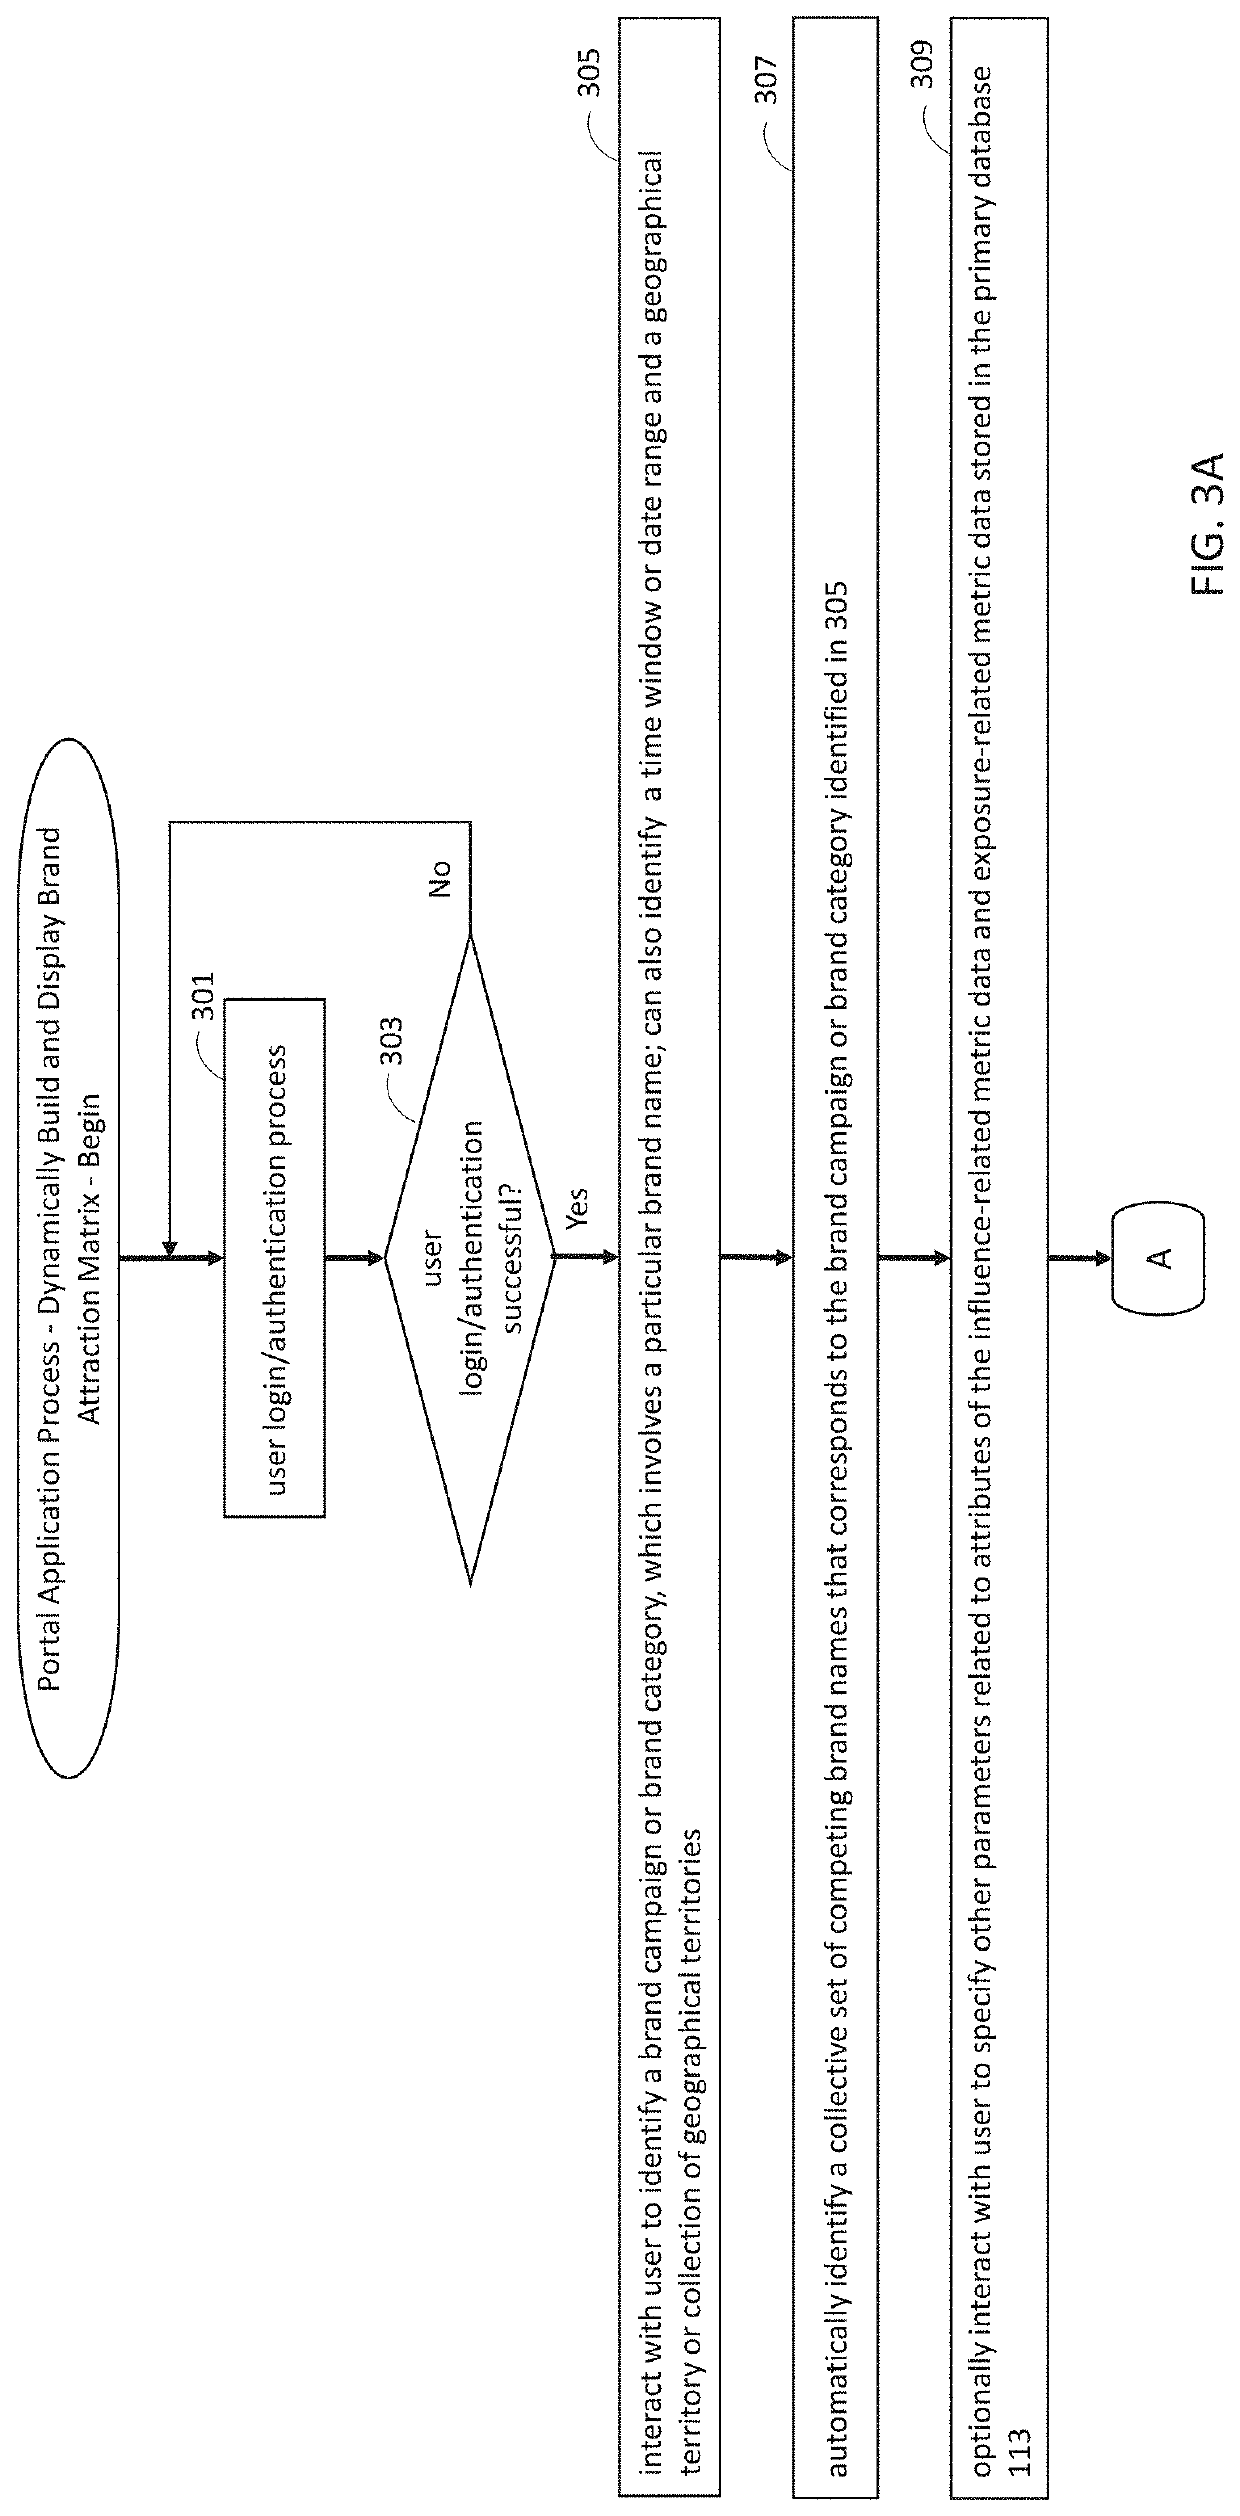 Methods and systems for monitoring brand performance based on consumer behavior metric data and expenditure data related to a competitive brand set over time